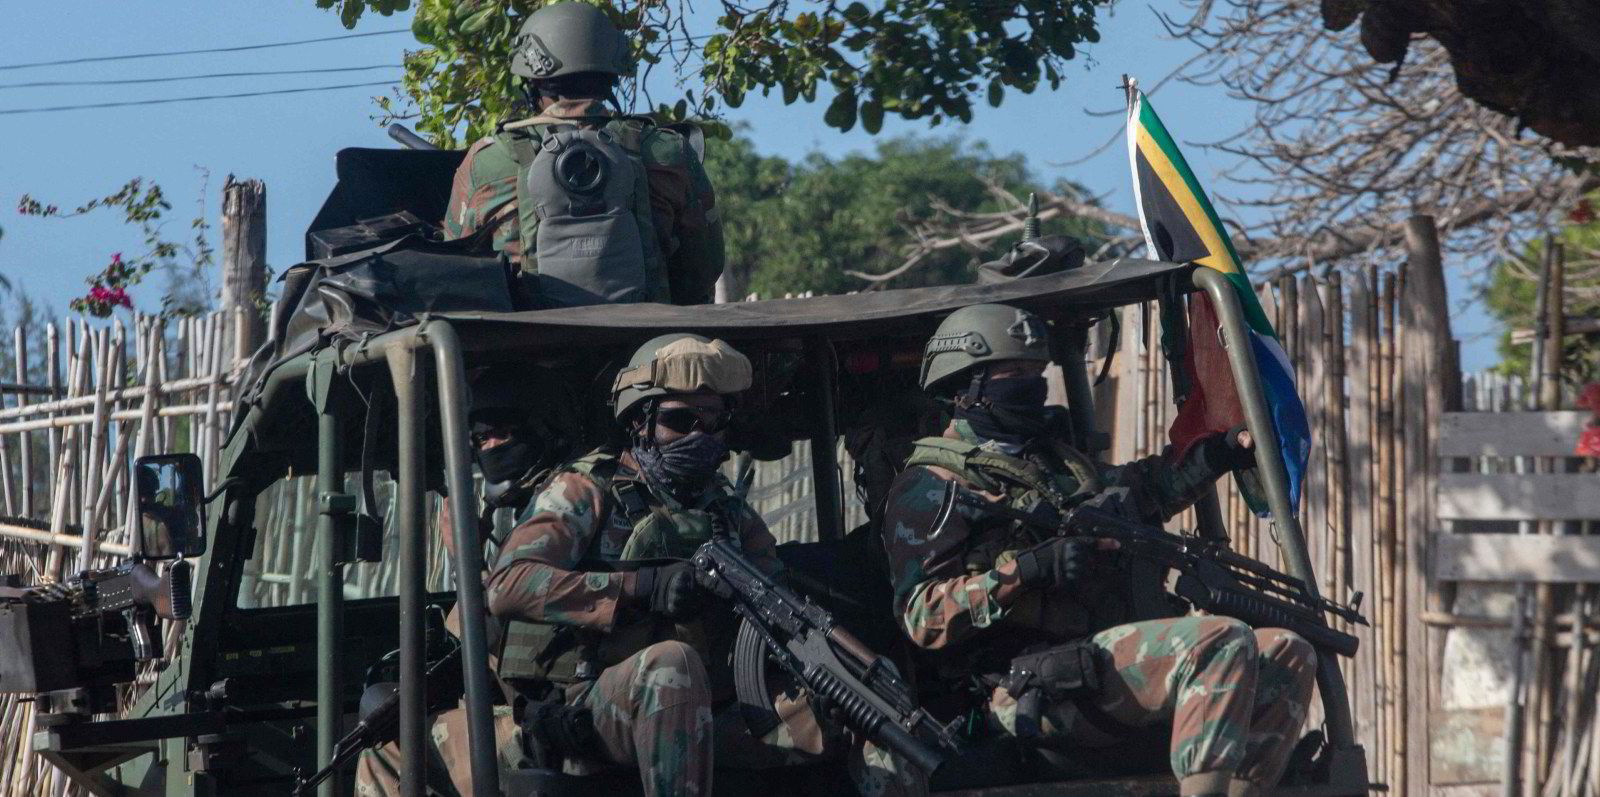 frelimo soldiers